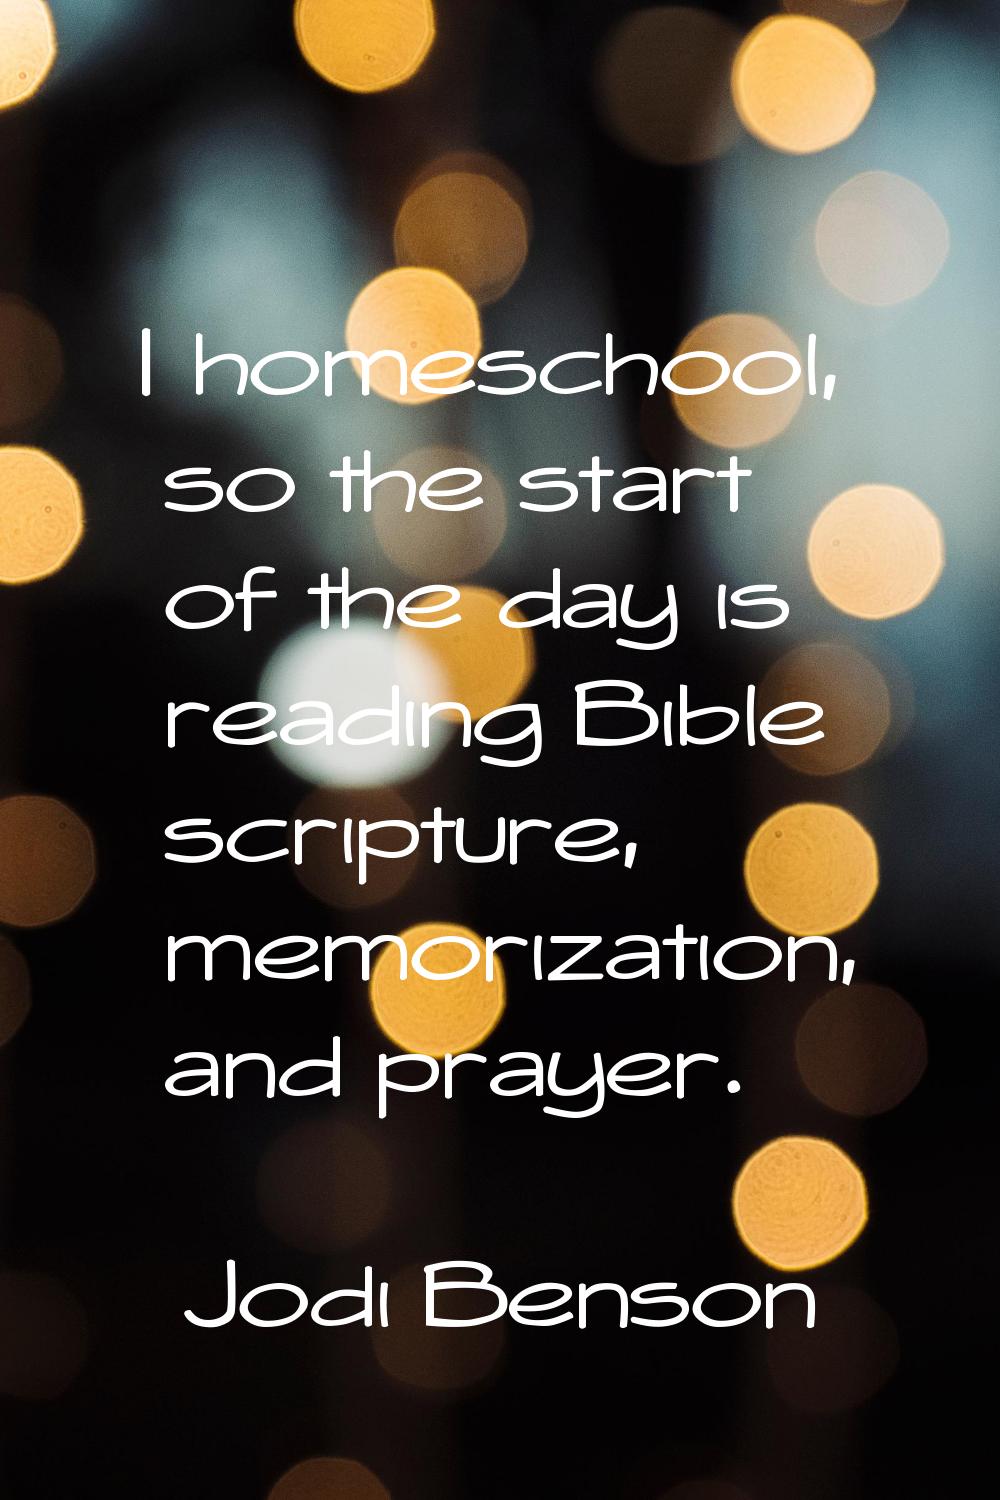 I homeschool, so the start of the day is reading Bible scripture, memorization, and prayer.